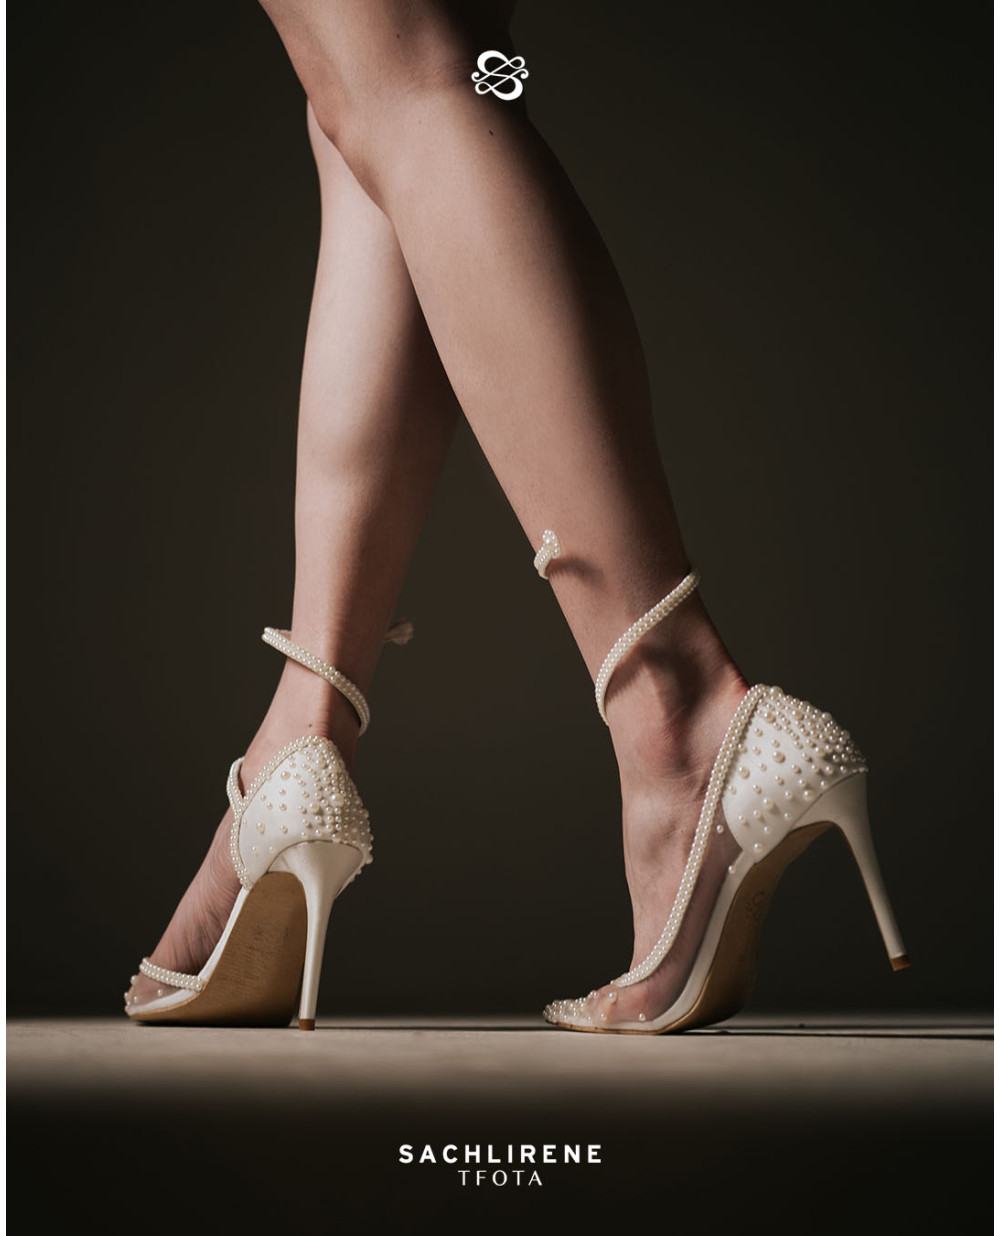 SERAPHINE & PEARL SHOES